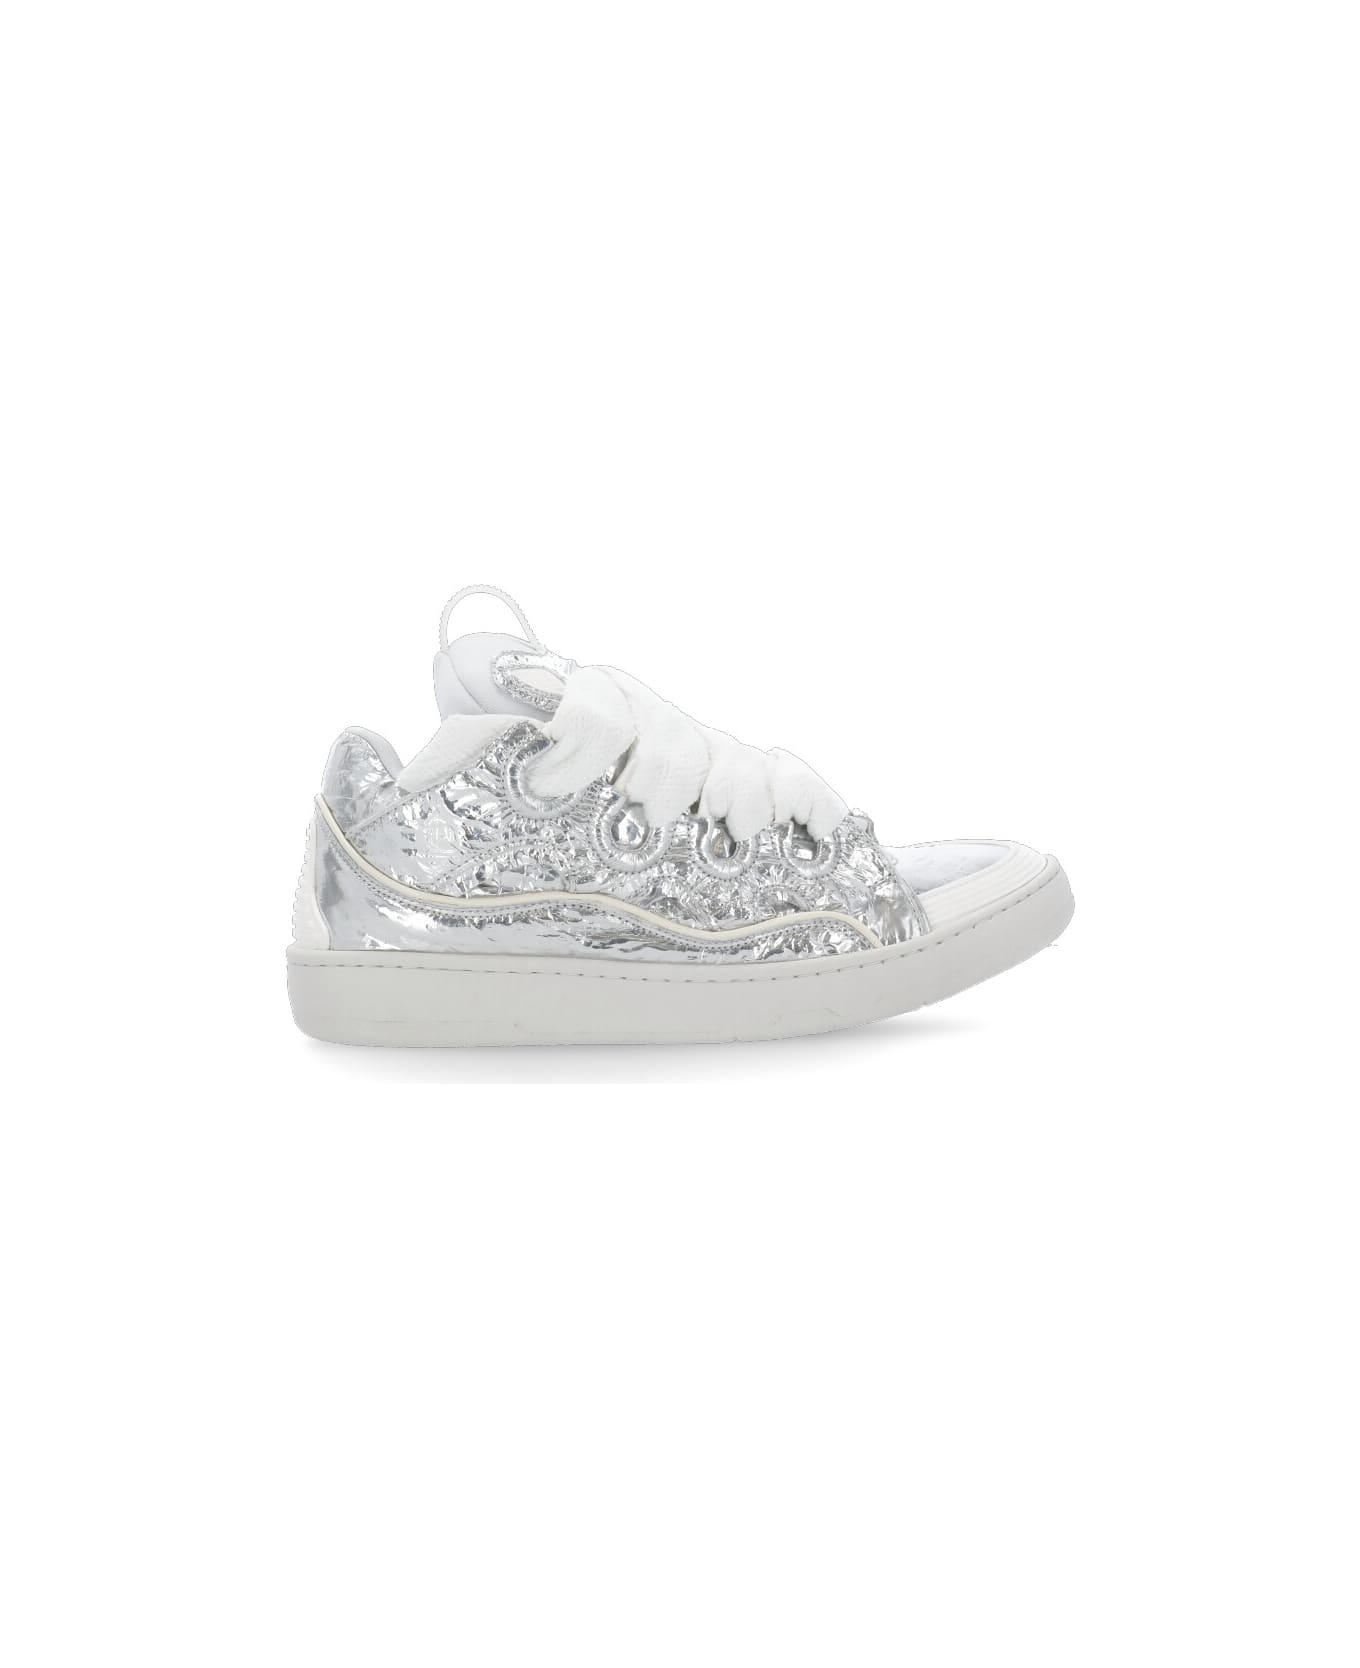 Lanvin Curb Sneakers - Silver スニーカー